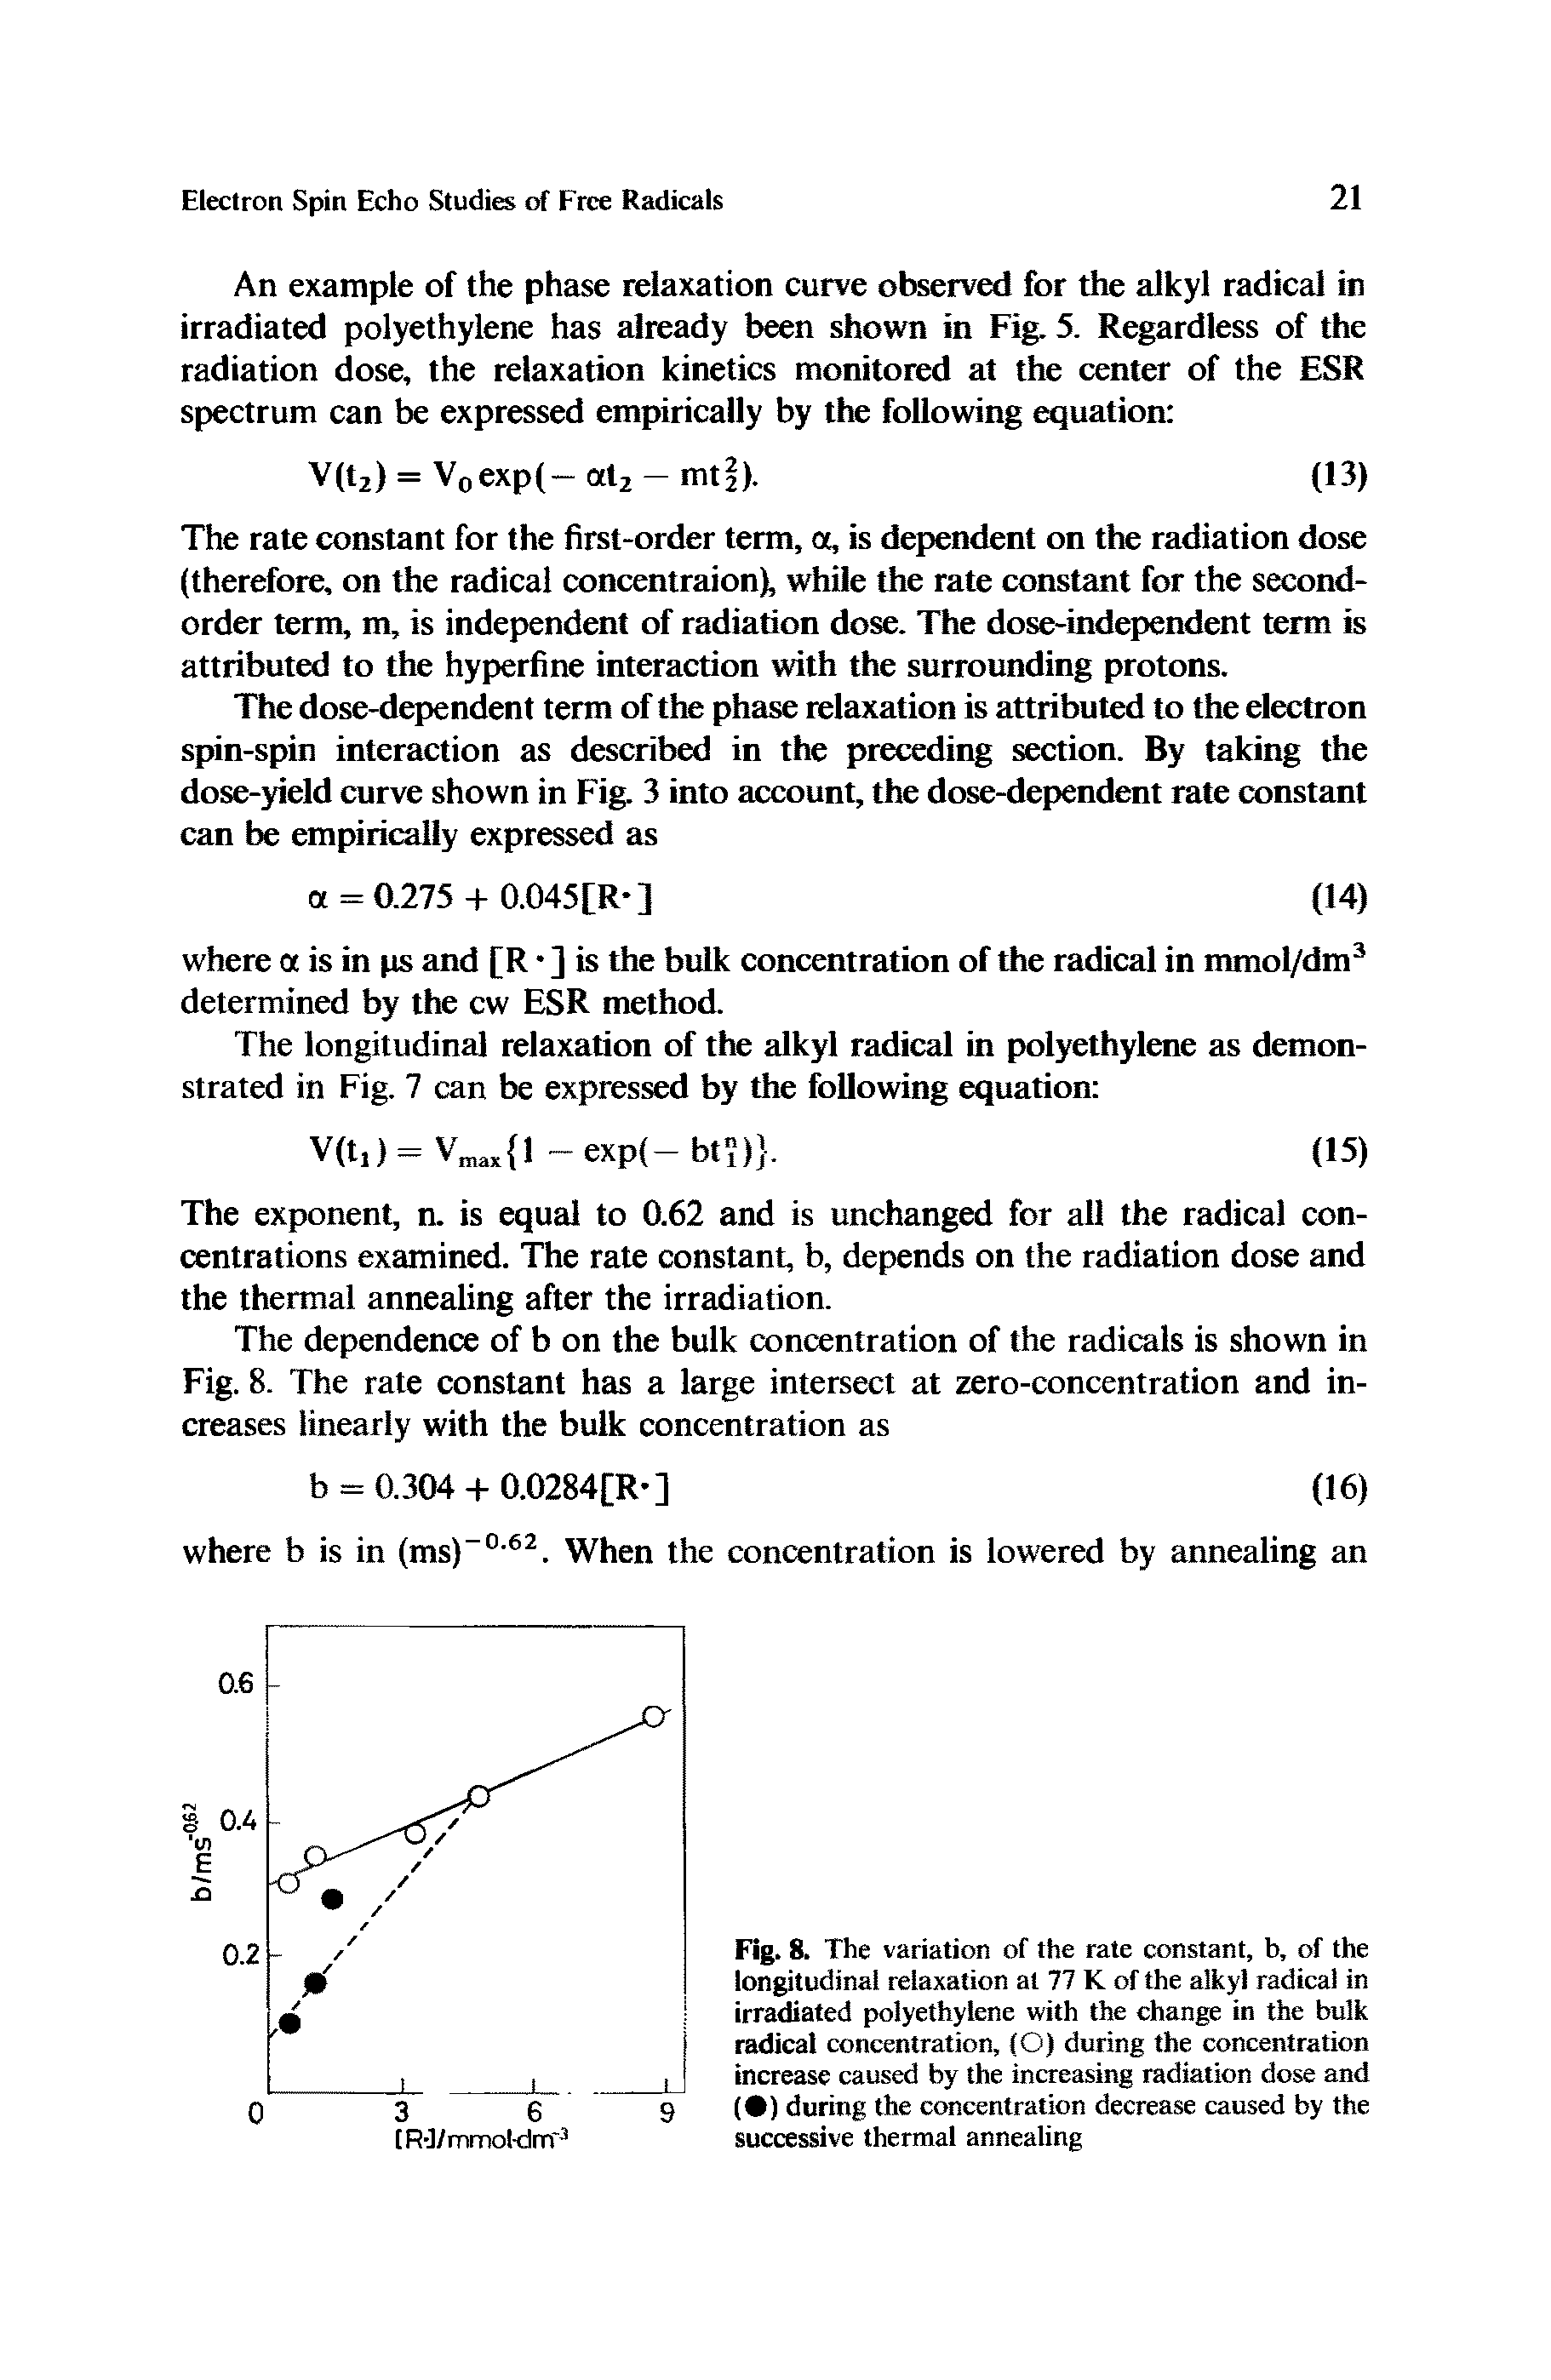 Fig. 8. The variation of the rate constant, b, of the longitudinal relaxation at 77 K of the alkyl radical in irradiated polyethylene with the change in the bulk radical concentration, (O) during the concentration increase caused by the increasing radiation dose and ( ) during the concentration decrease caused by the successive thermal annealing...